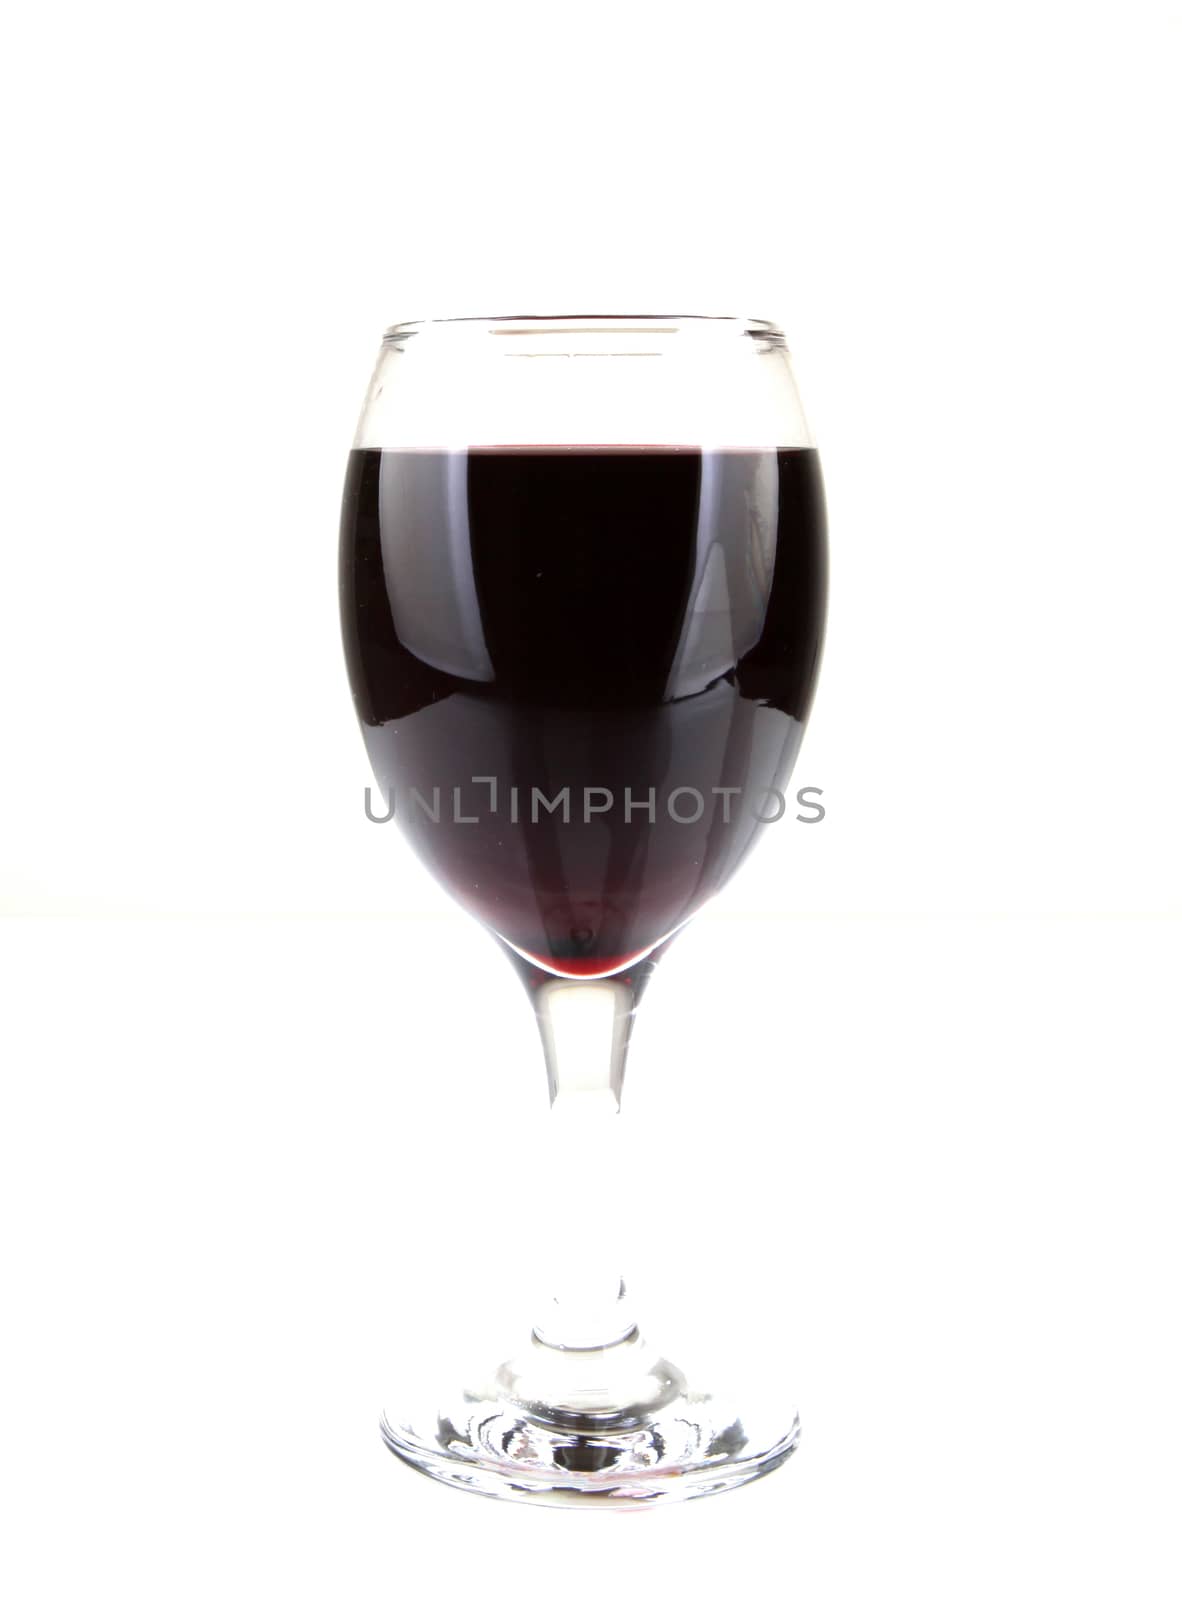 Red Wine On White Background